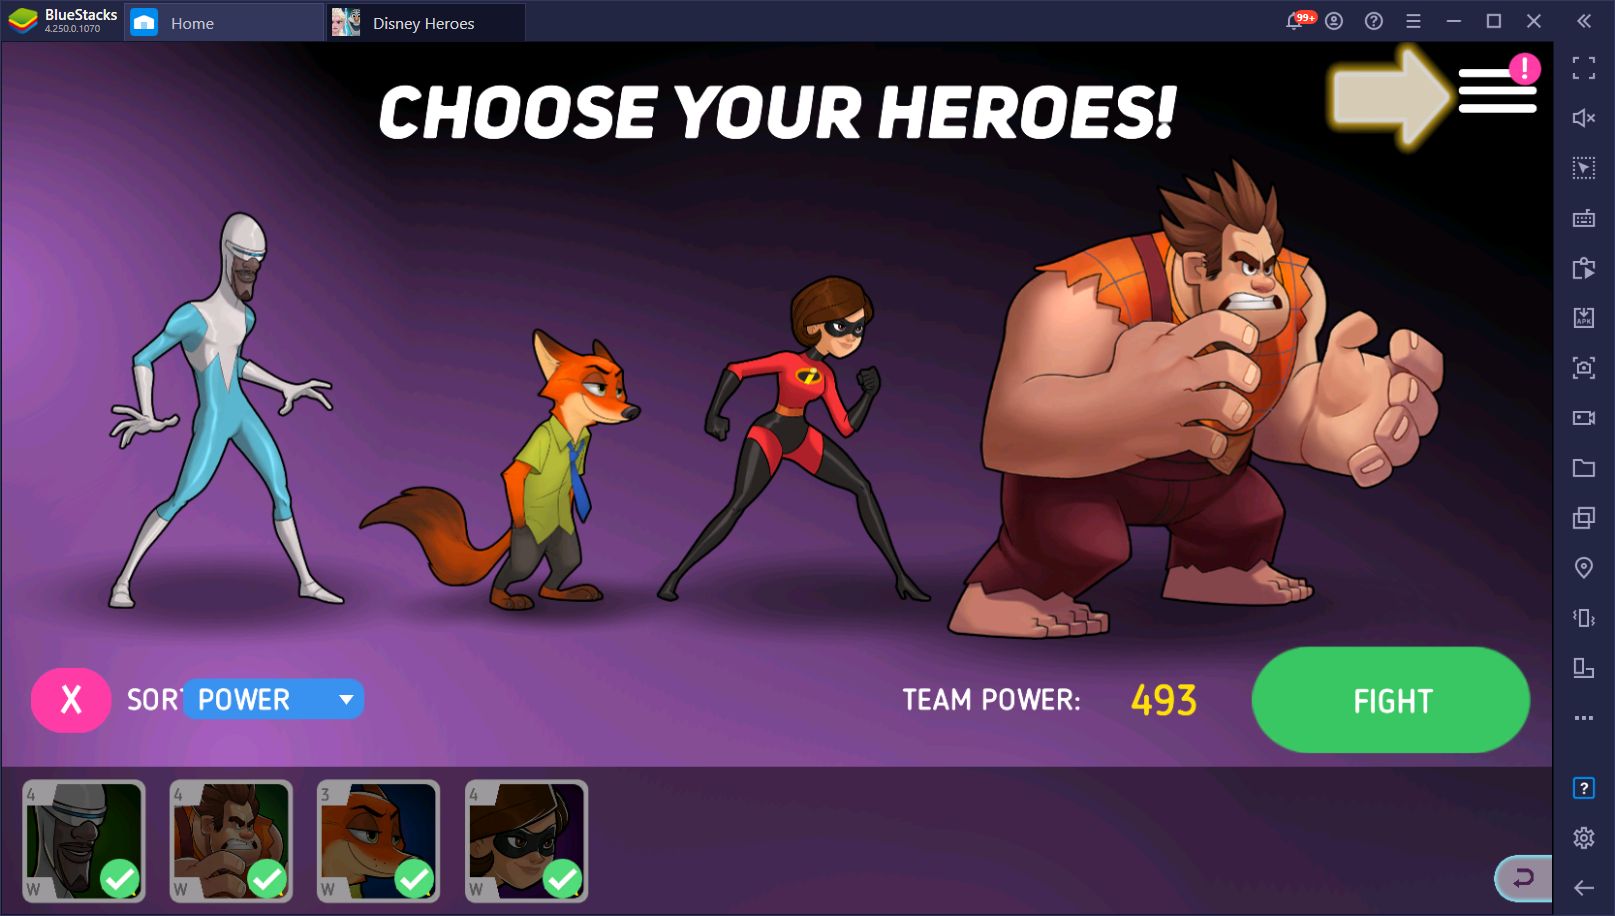 Roles for my characters - Hero Concepts - Disney Heroes: Battle Mode